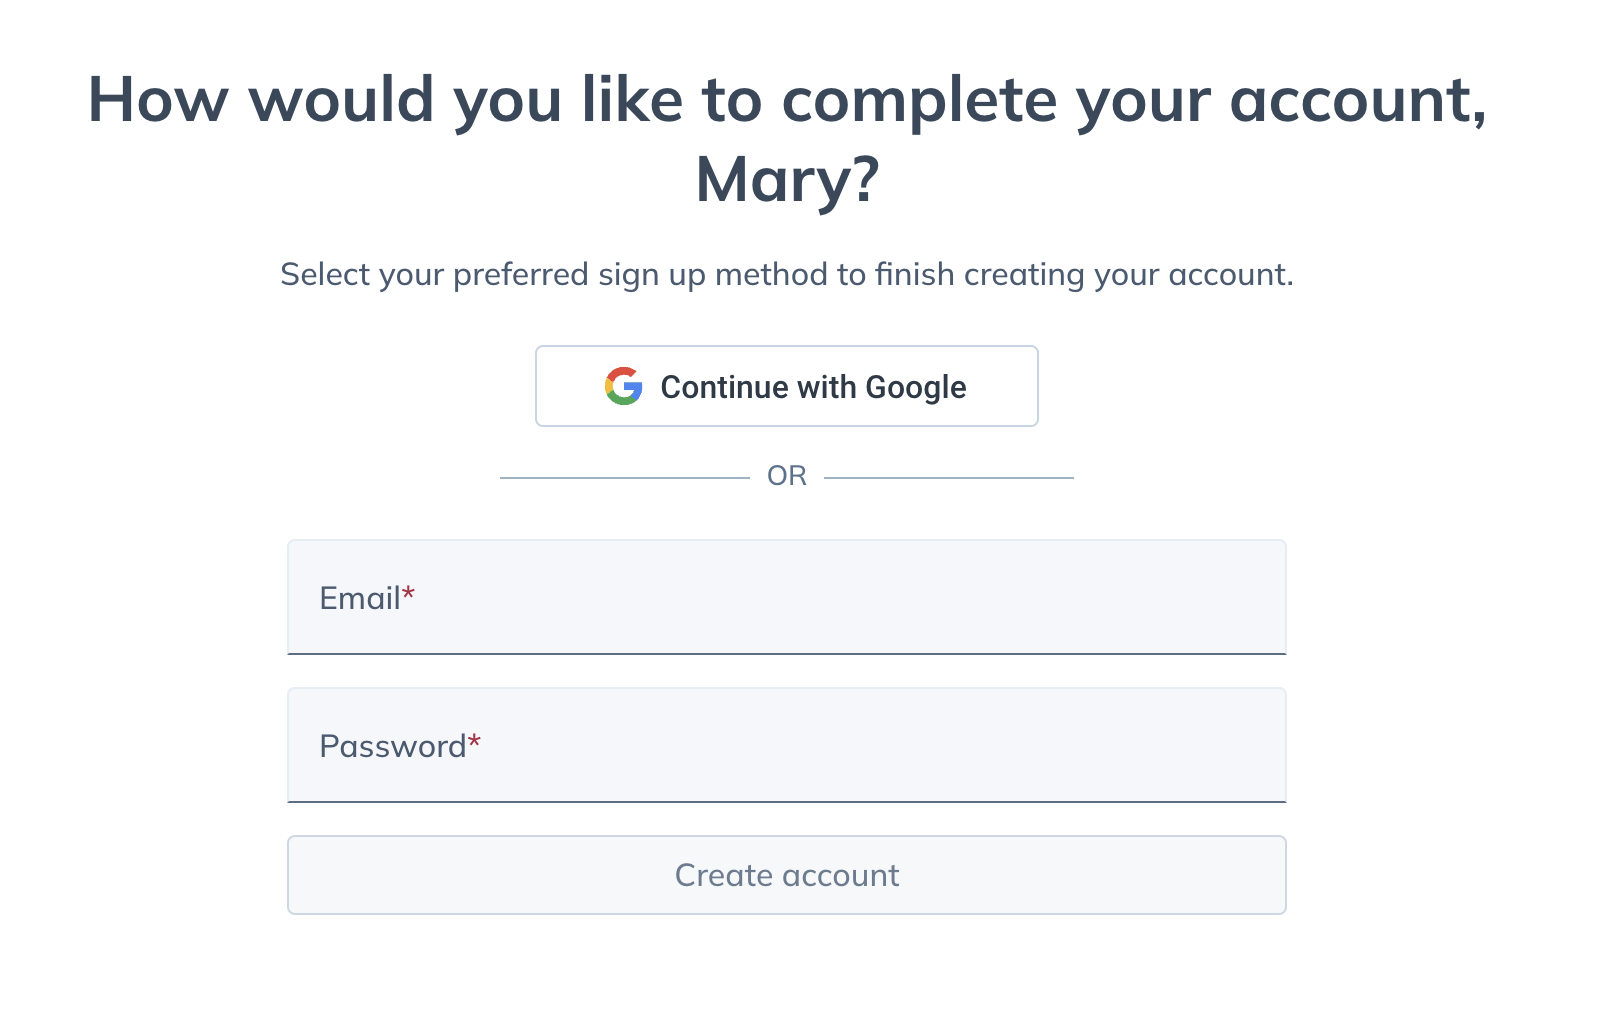 Provide your login credentials